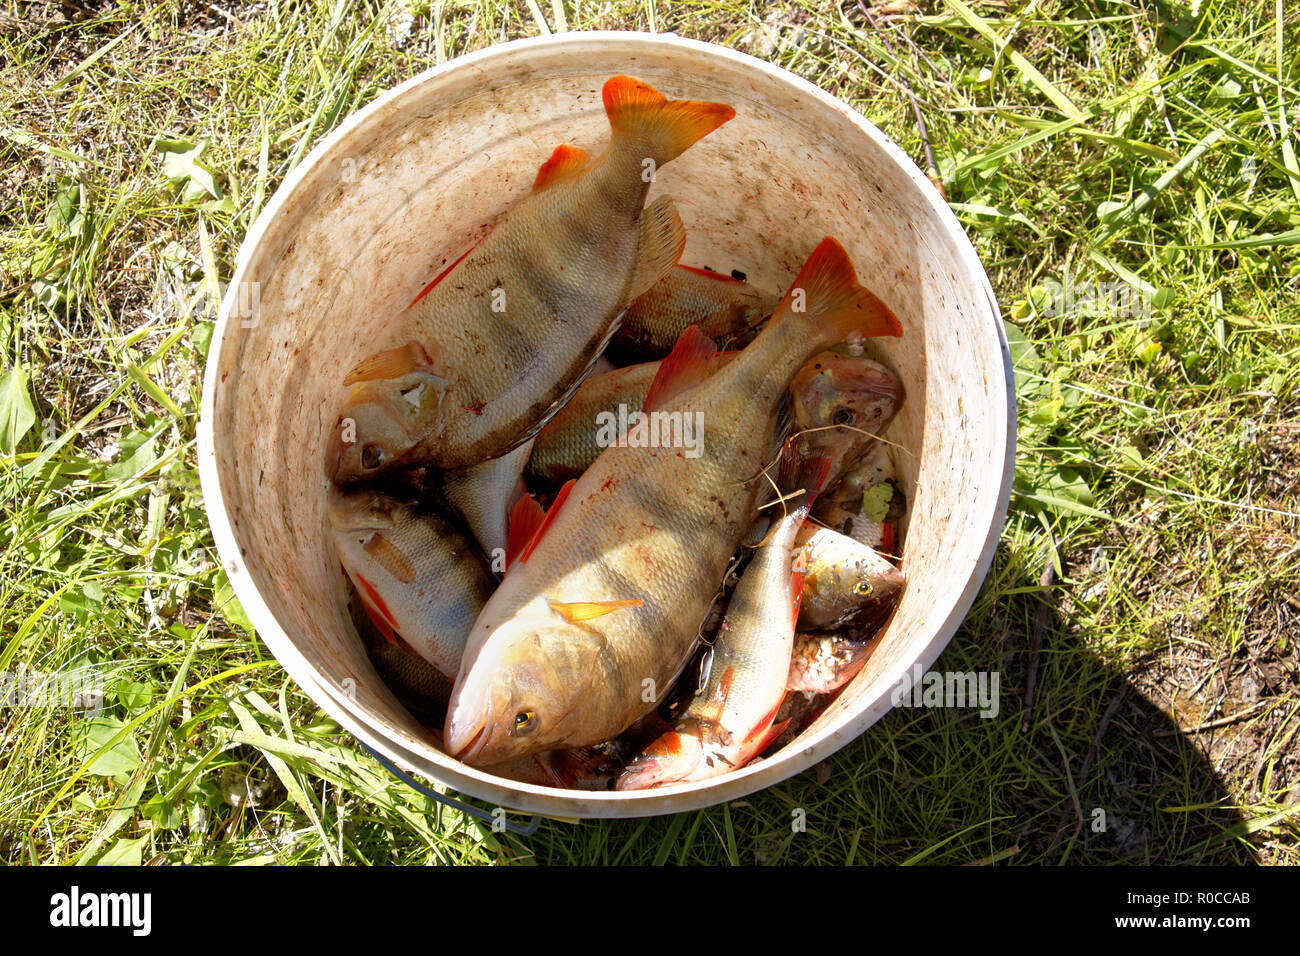 Fisherman's catch - a few large freshwater perch are in a plastic bucket Stock Photo